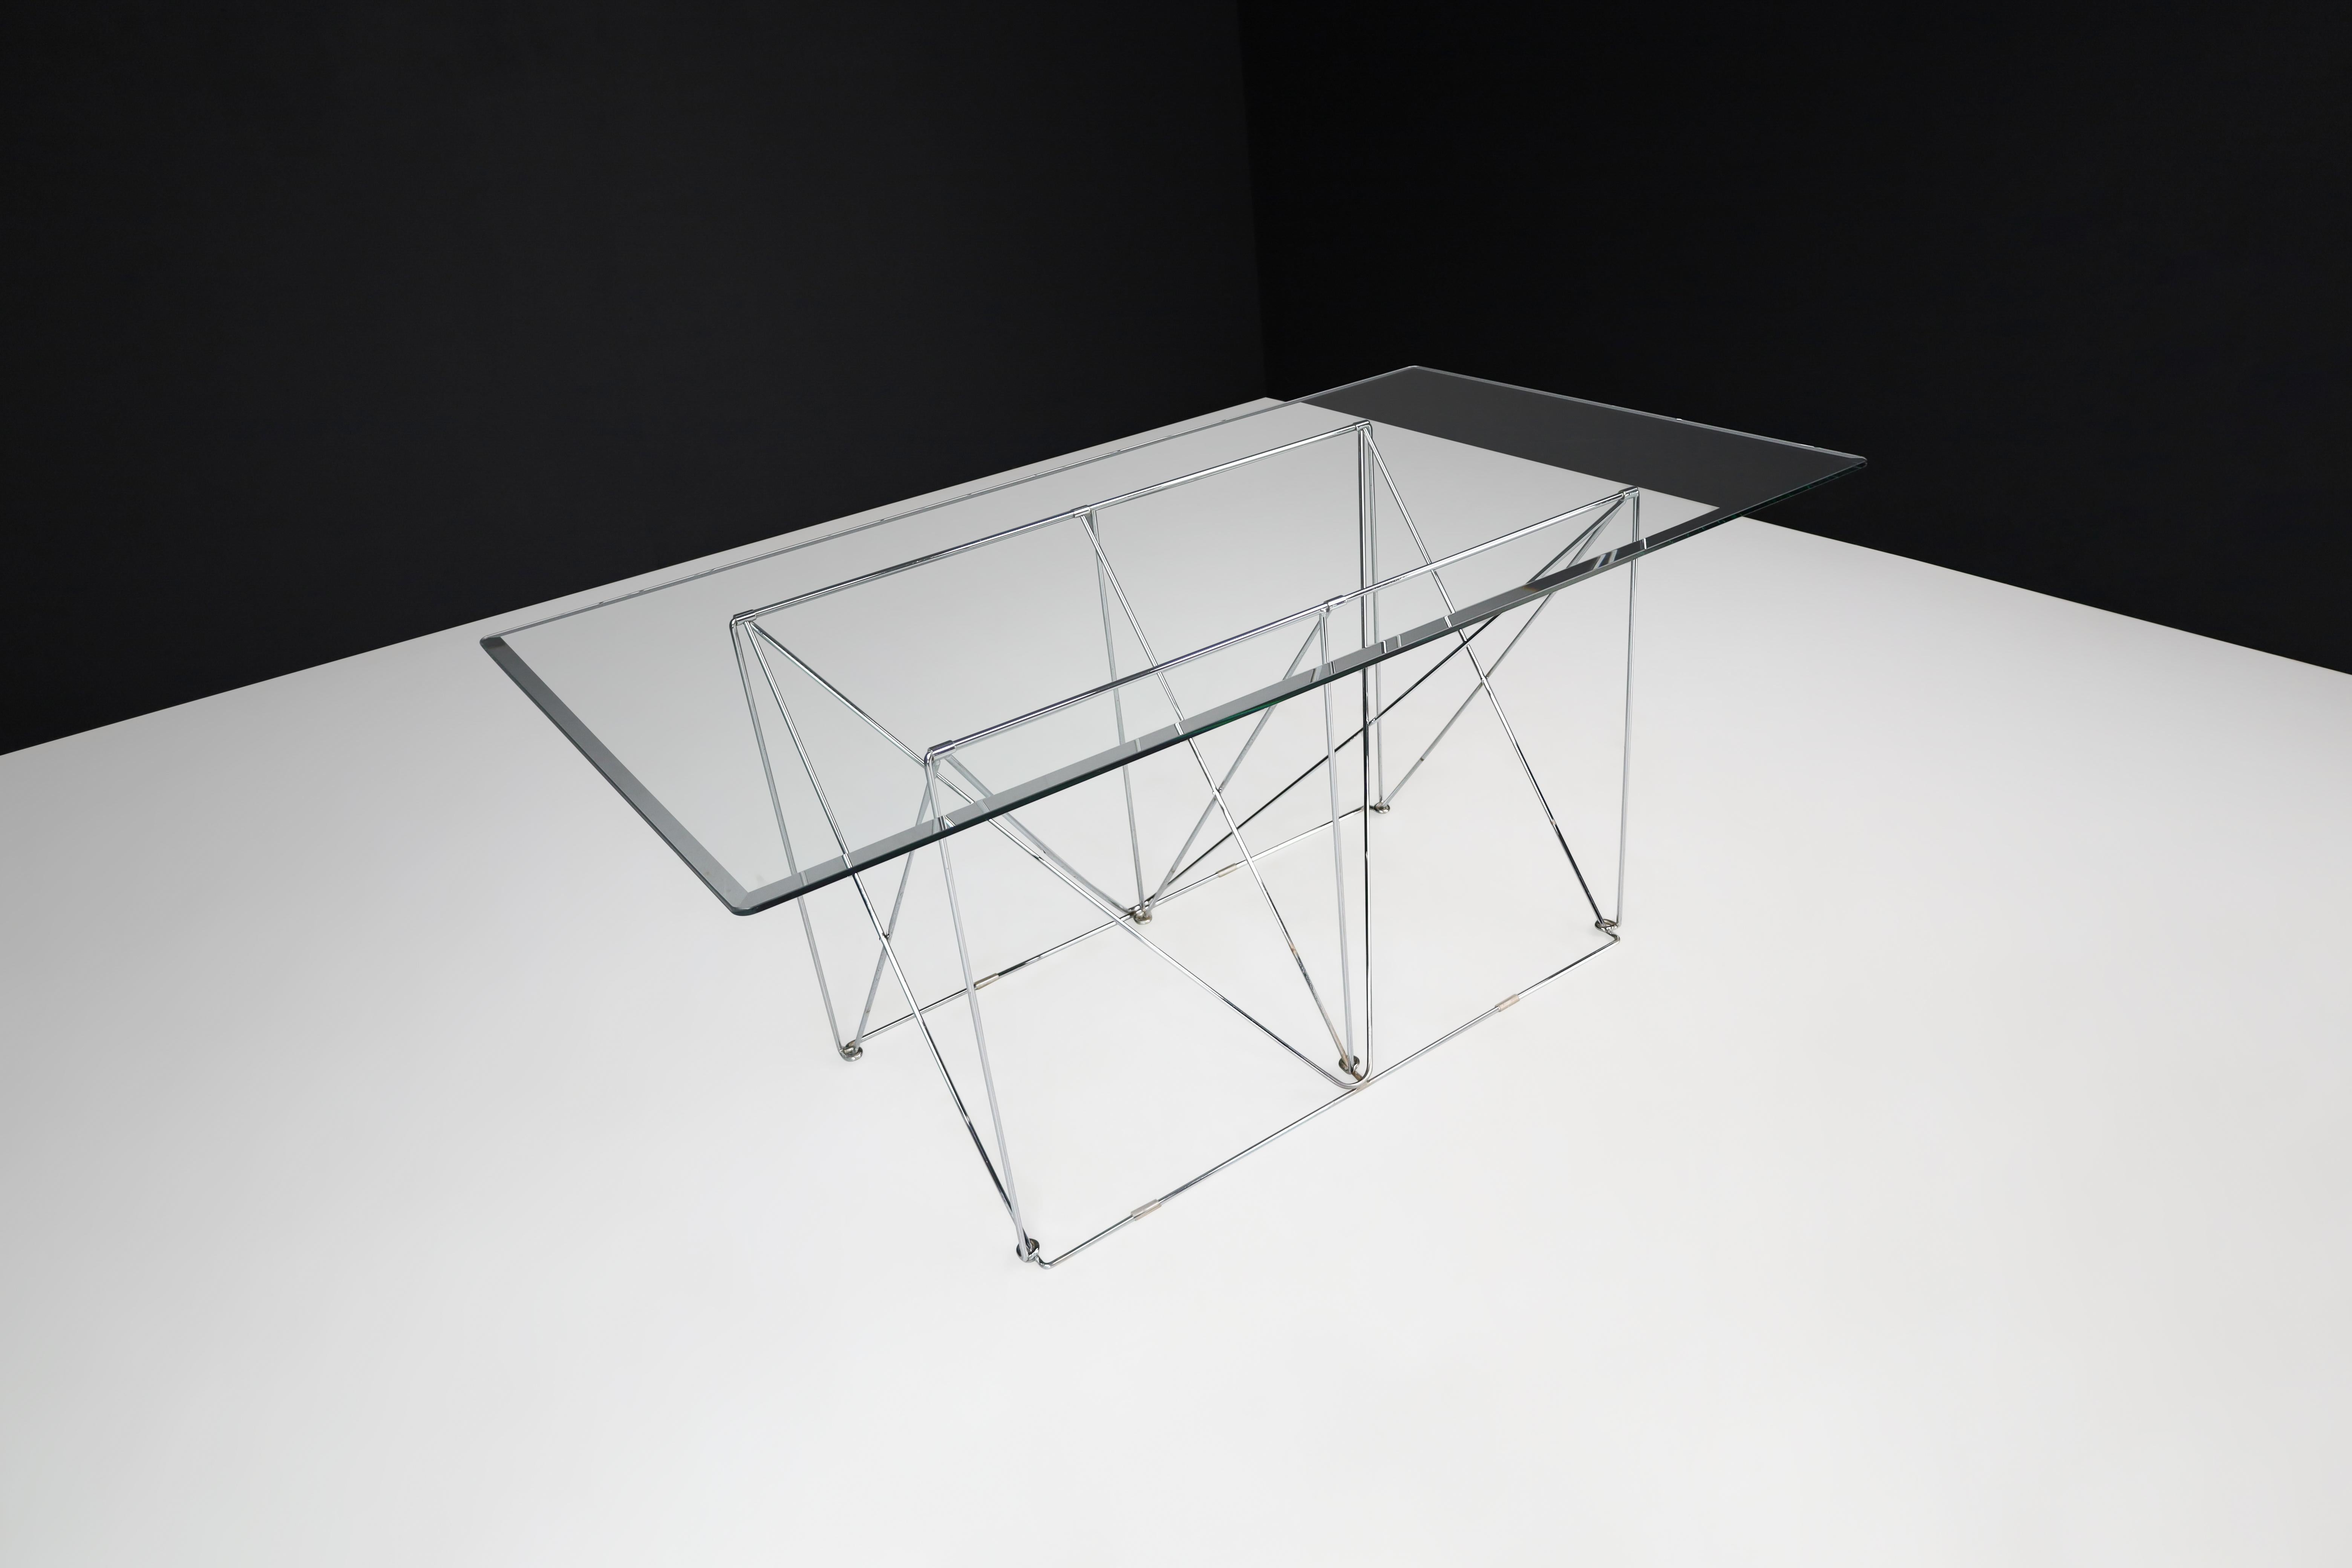 Steel Max Sauze Modern Architectural Folding Metal Table, France, 1970s For Sale